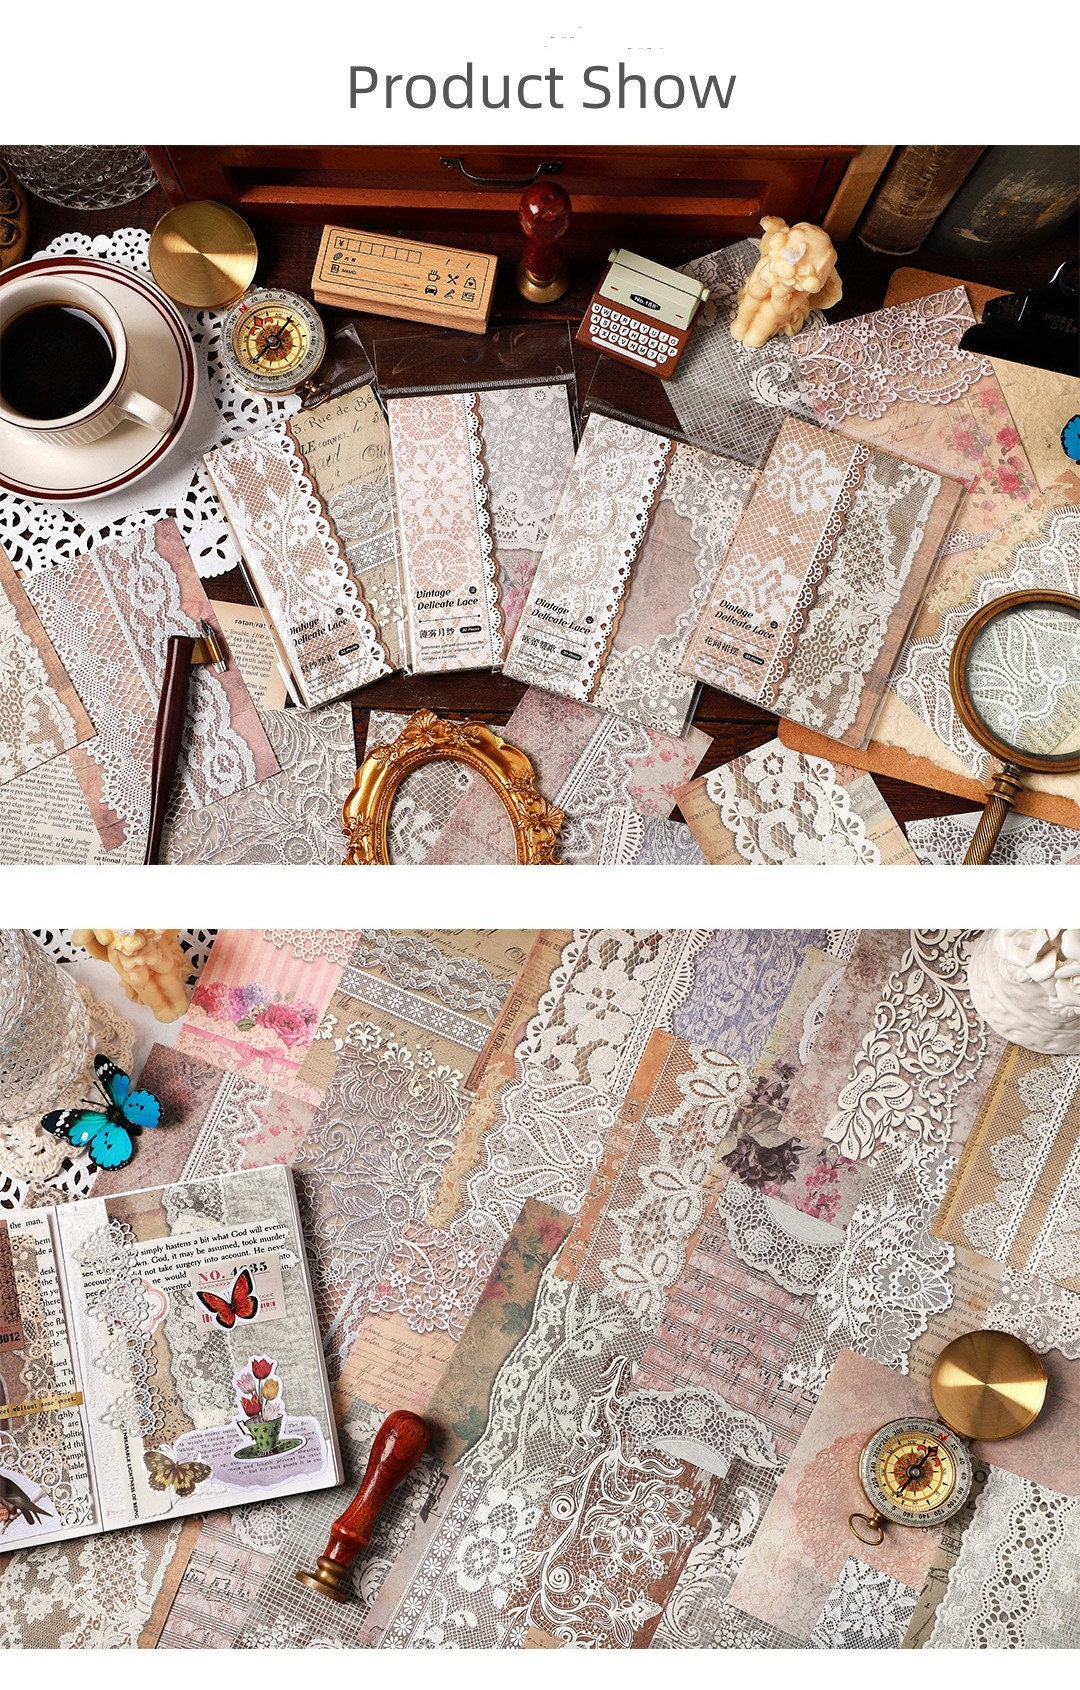 Lace Material Paper Pack Retro Background Paper Collage Scrapbooking Floral Butterfly Notepaper Non-adhesive Junk Journaling Supplies 30Pcs